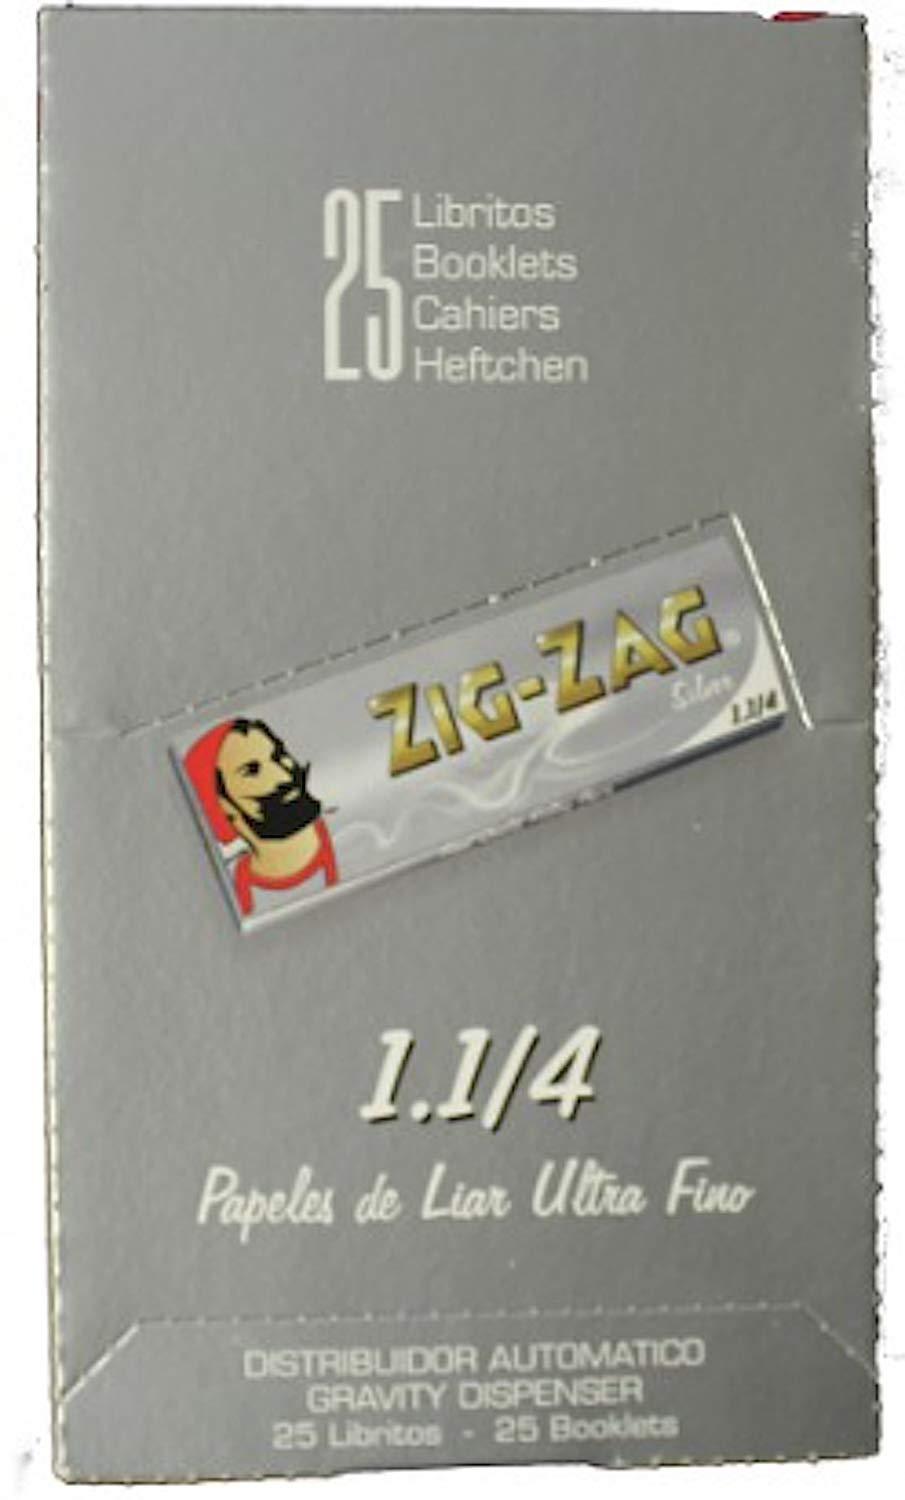 Zig-Zag Silver 1 1/4 - Rolling Paper (Box of 25) - Quecan